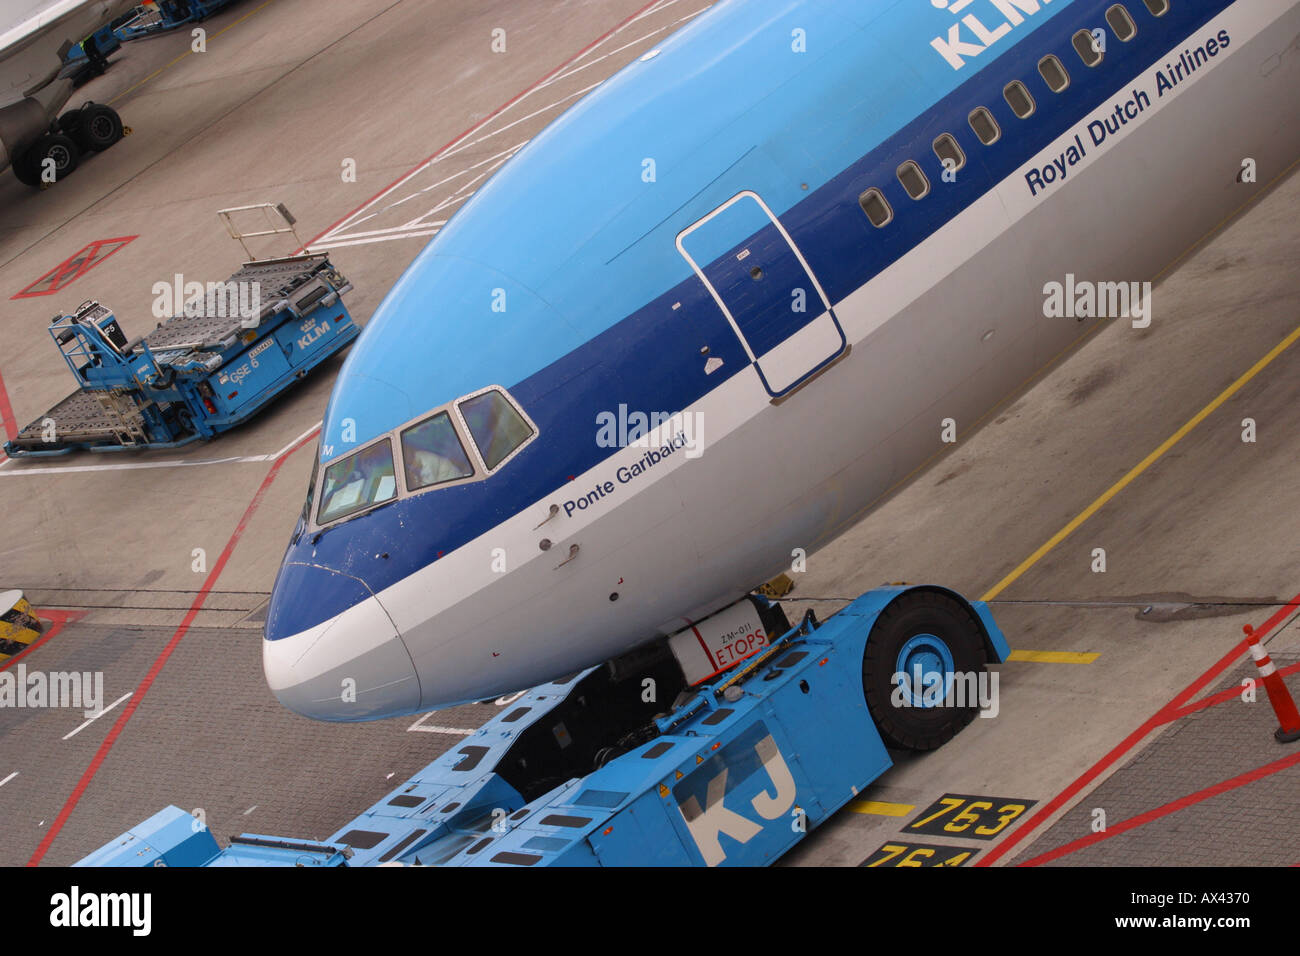 KLM MD 11 airliner awaiting pushback on airport apron Stock Photo